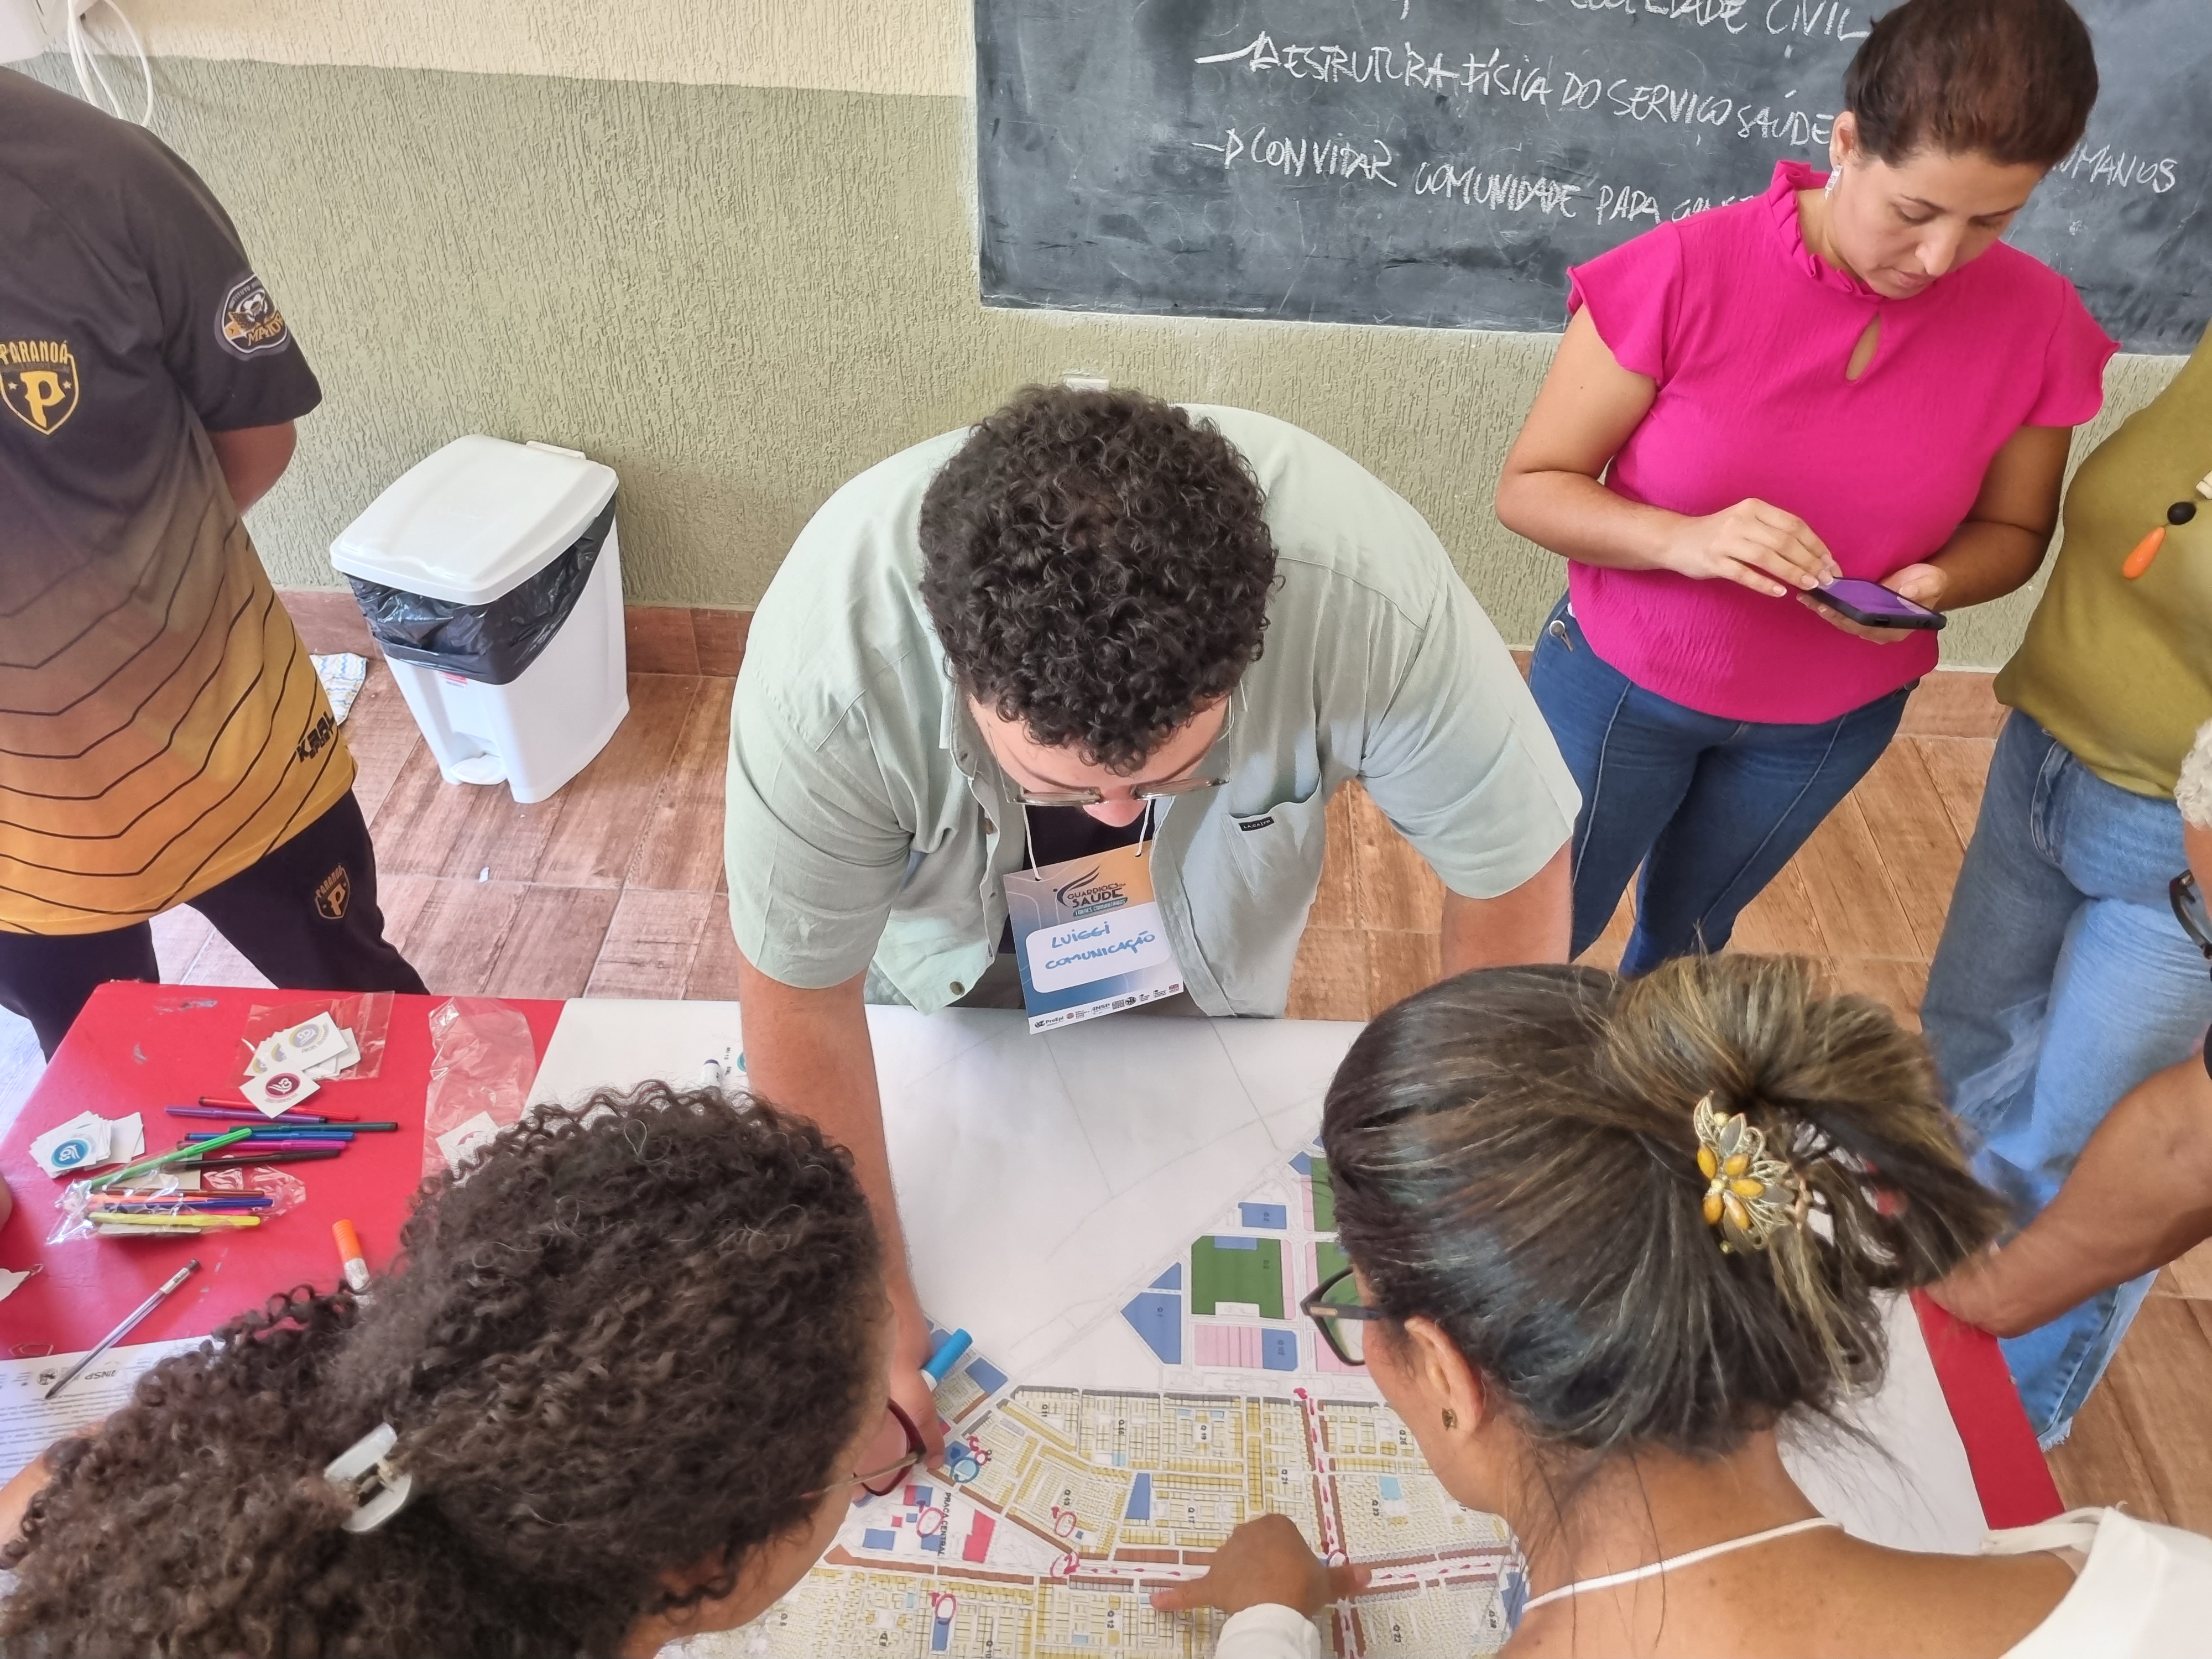 overhead shot of Brazil workshop participants looking at map on table